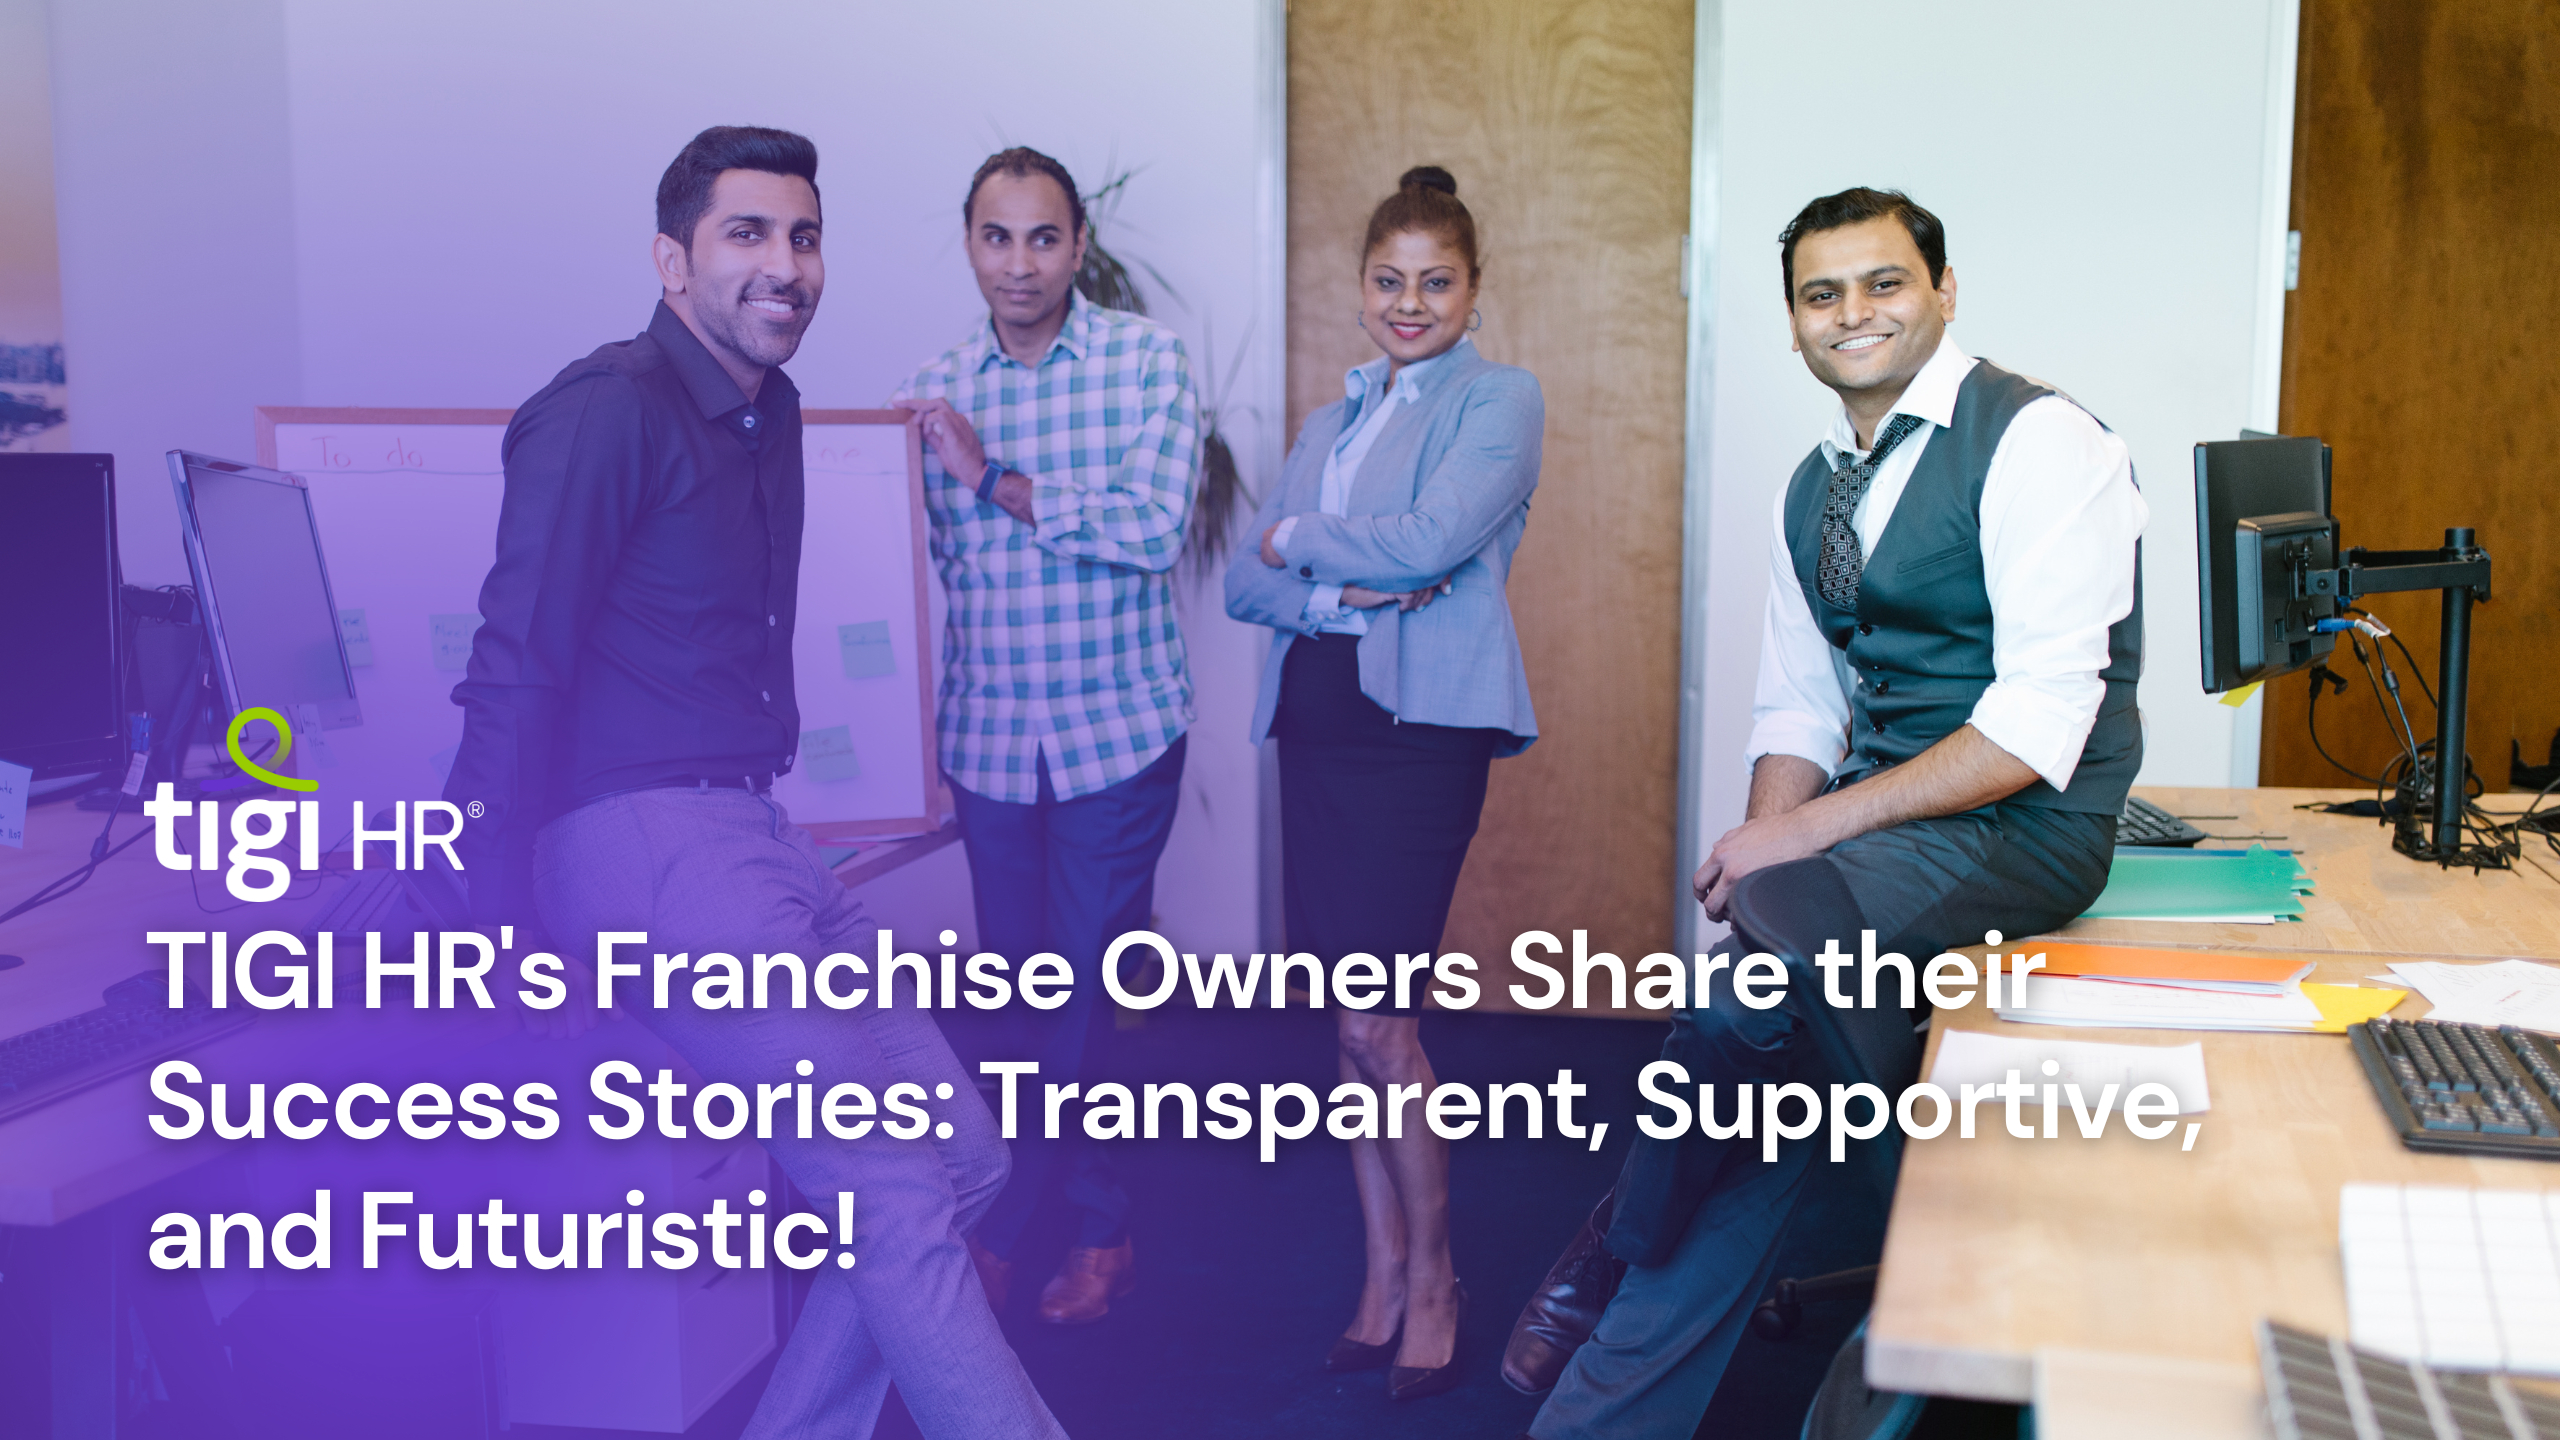 TIGI HR's Franchise Owners Share their Success Stories: Transparent, Supportive, and Futuristic!